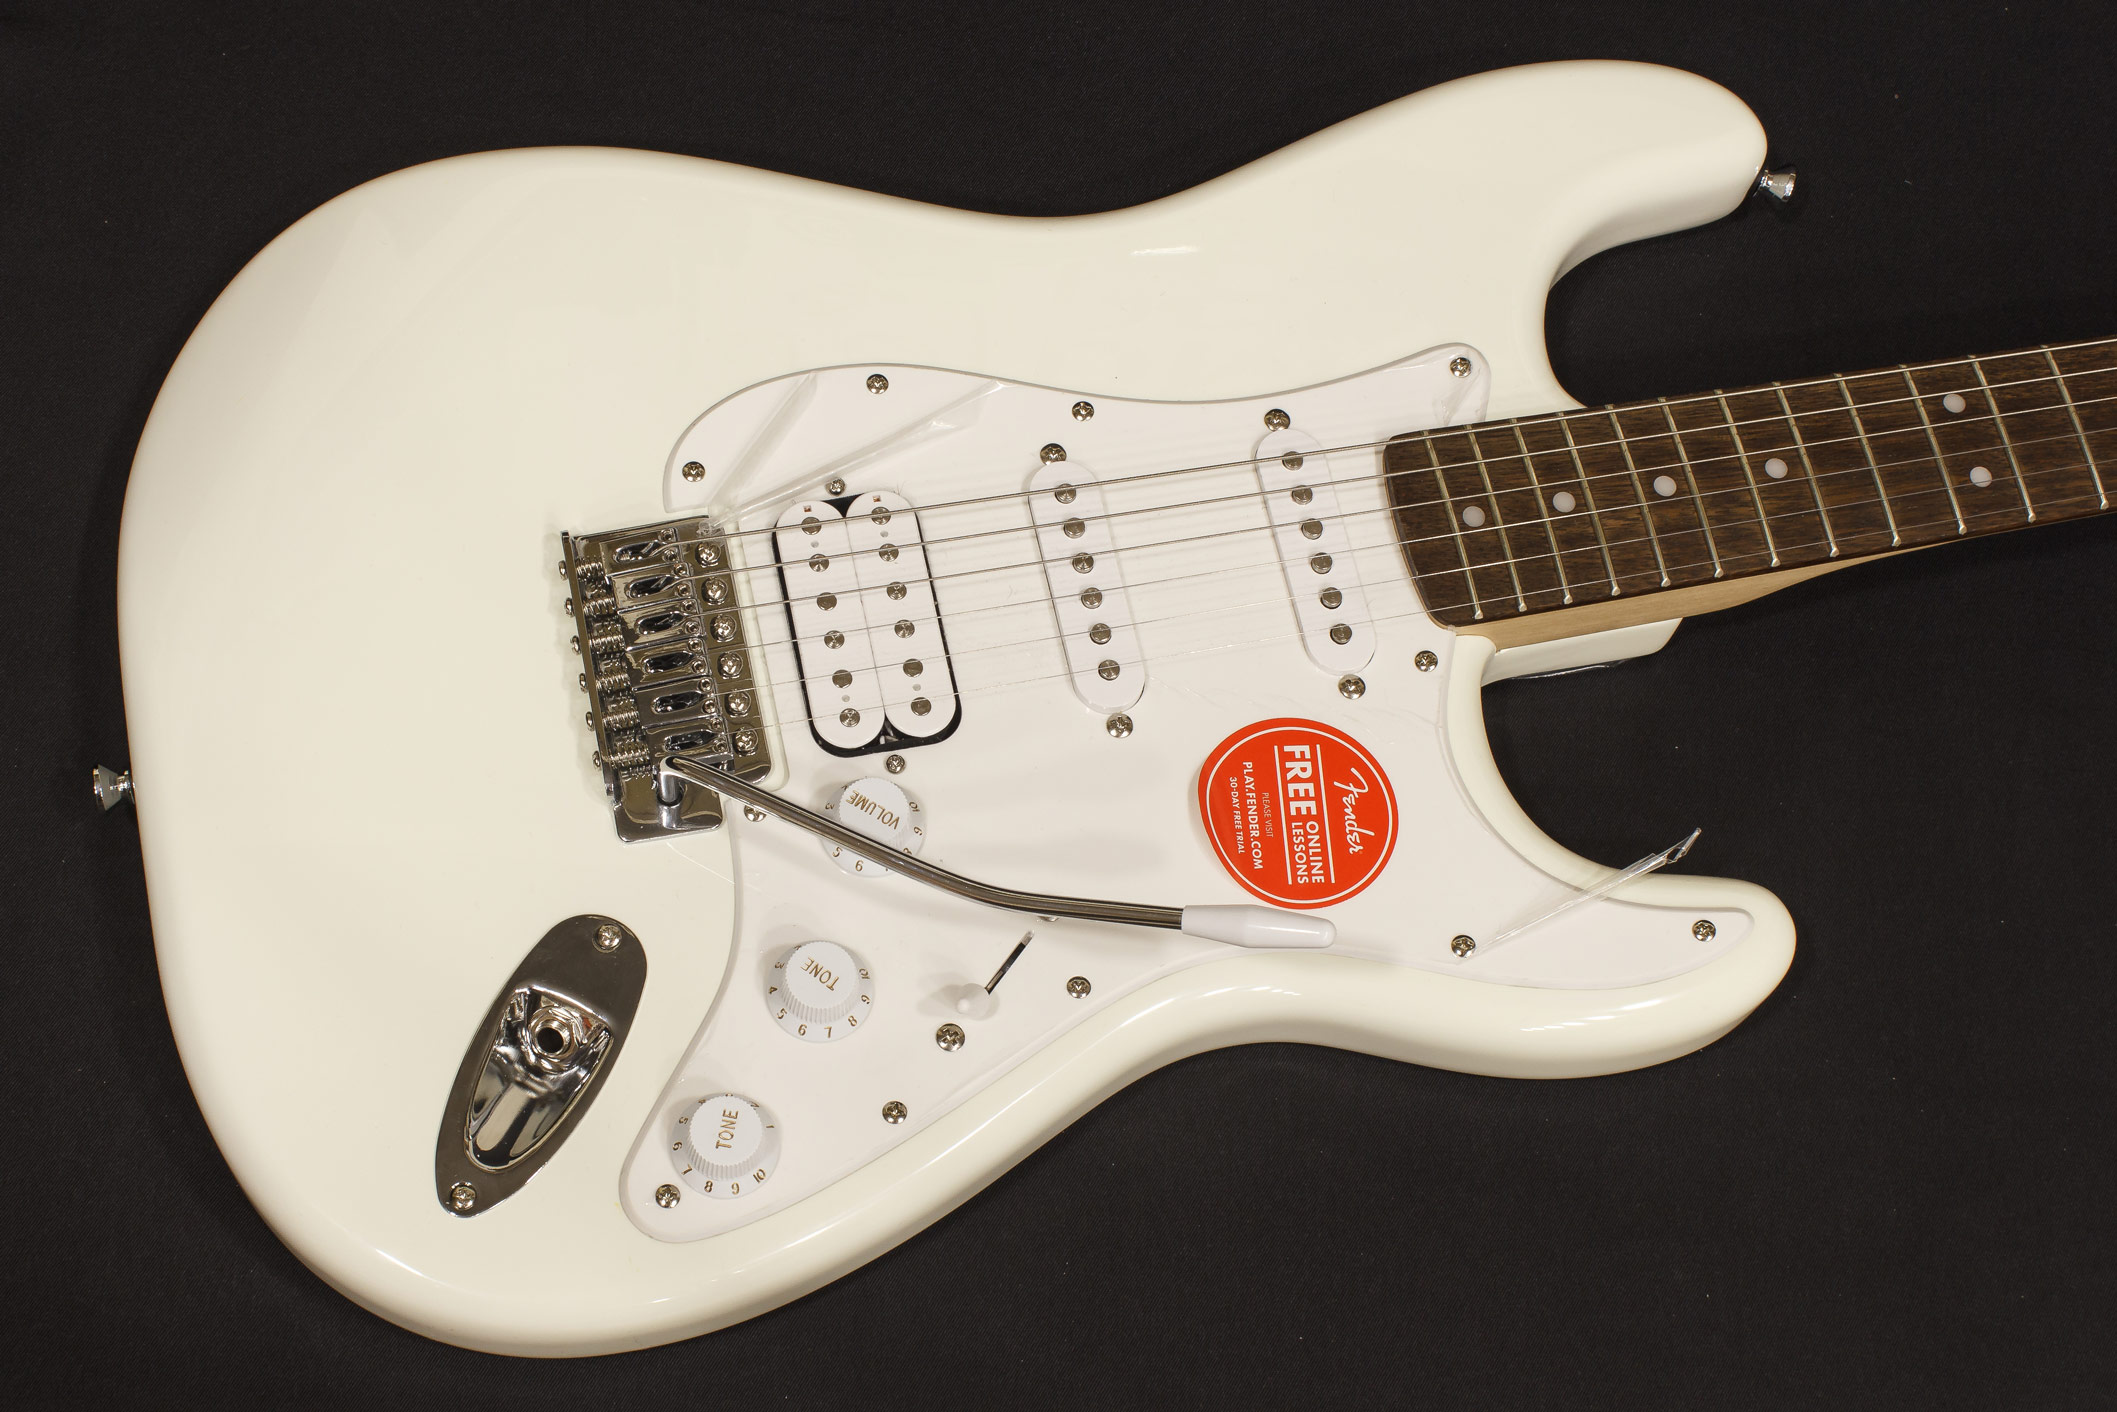 Squier mm stratocaster. Squier by Fender стратокастер. Стратокастер Fender Squier Музторг. Squier Relic. Fender mm Stratocaster hard Tail Black - электрогитара Фендер.